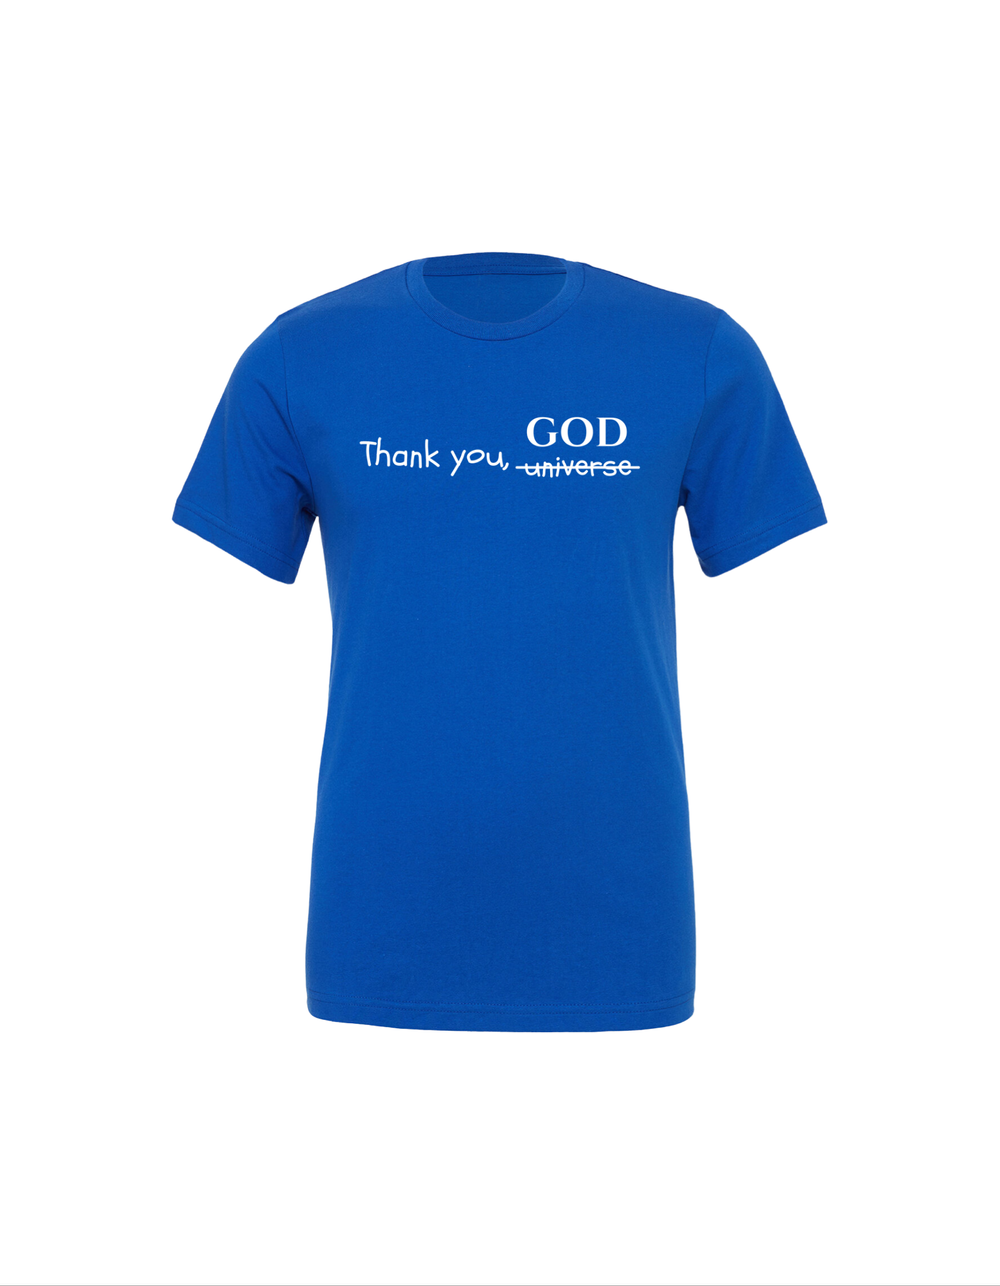 “Thank God not the universe” Tees